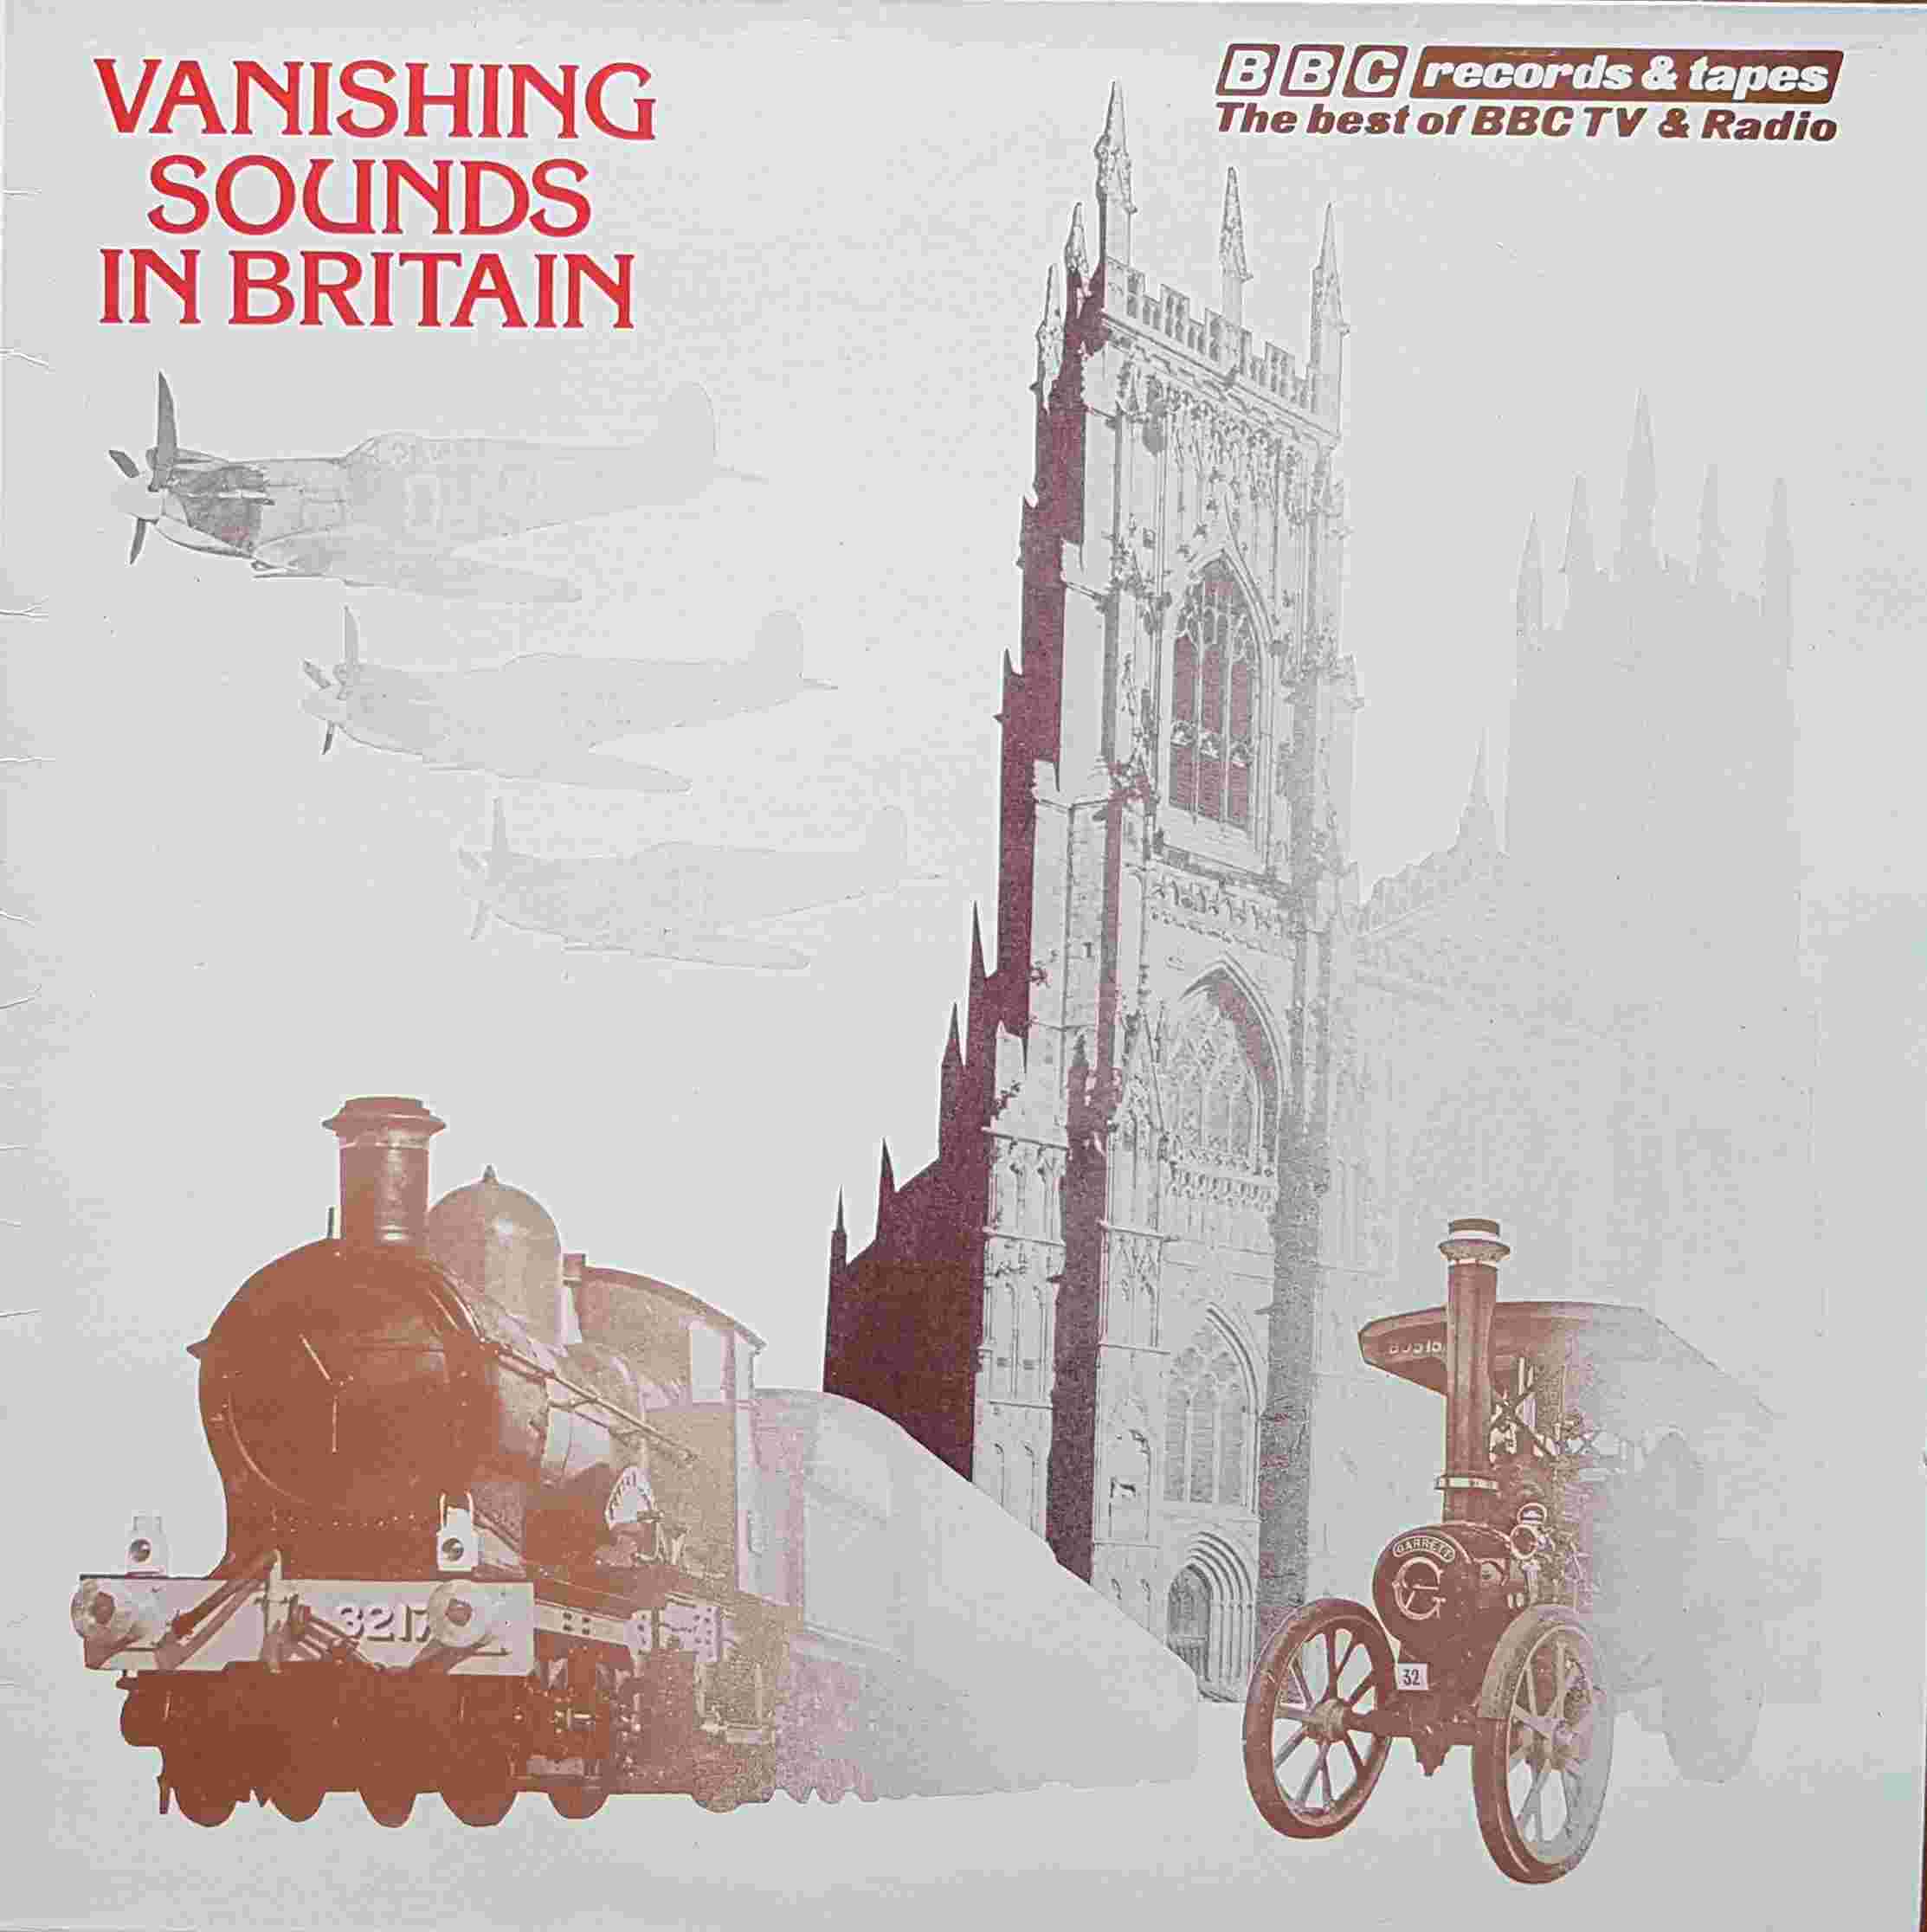 Picture of REC 227 Vanishing sounds of Britain by artist Various from the BBC albums - Records and Tapes library